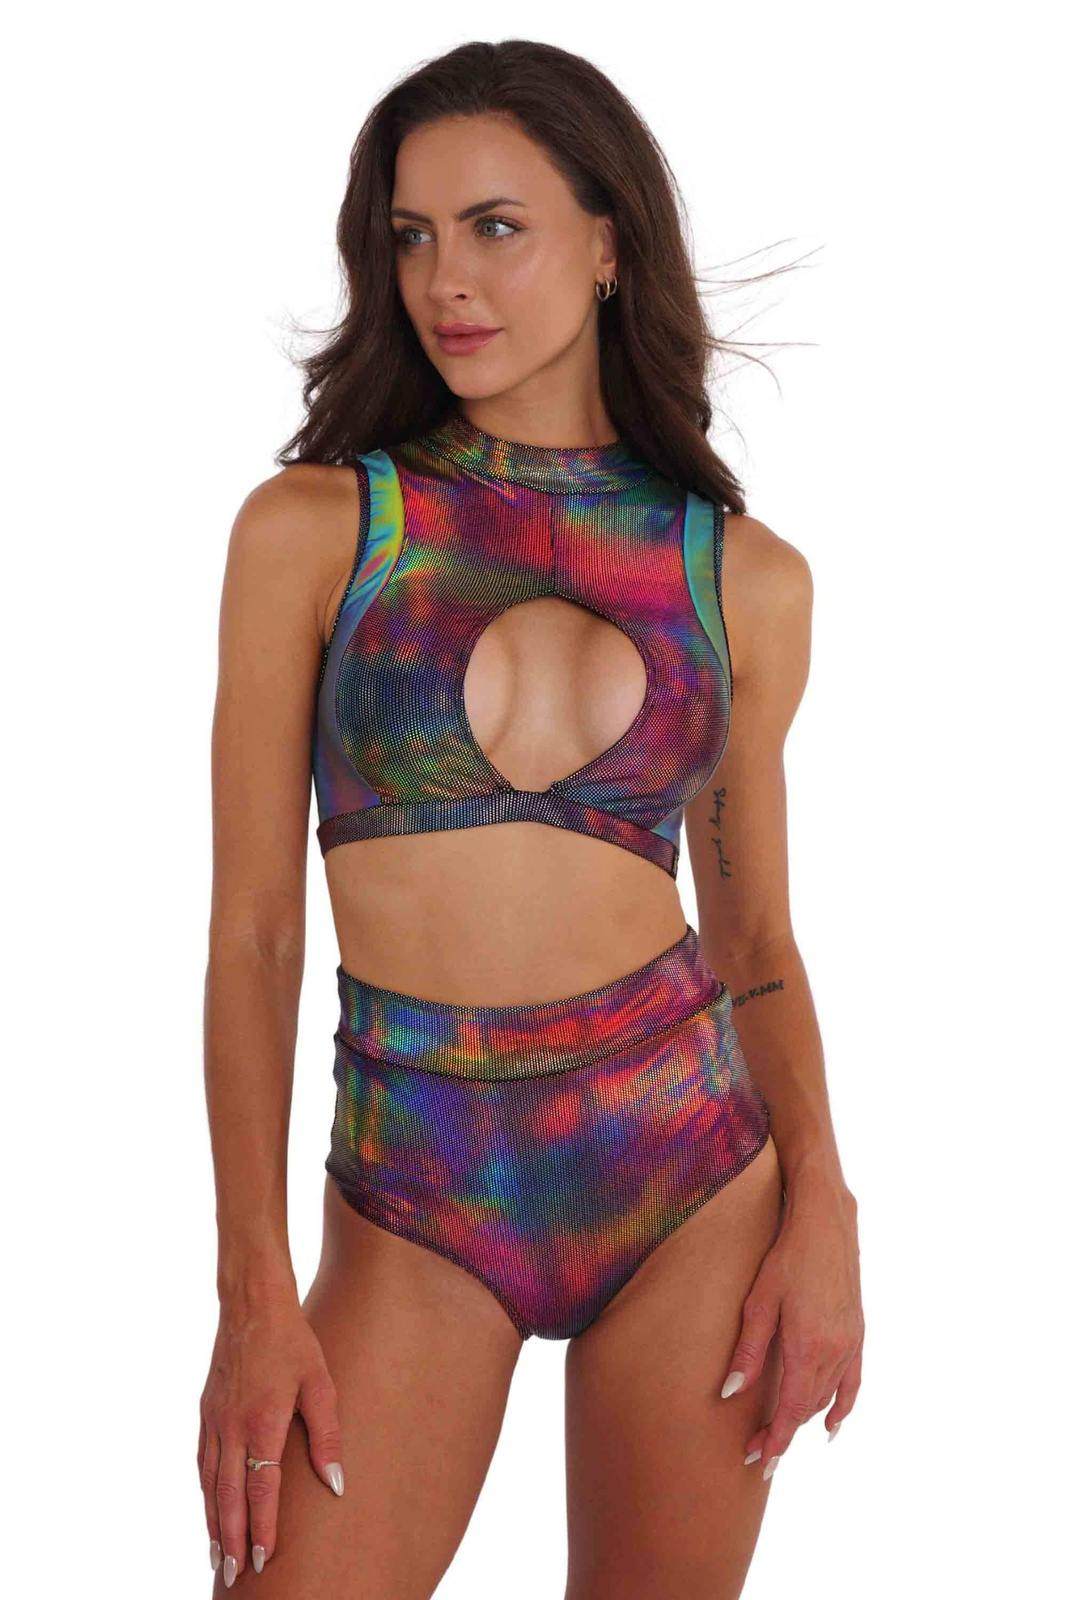 Rainbow Holographic Fantasia Keyhole Crop Top in Techno Color from Love Khaos